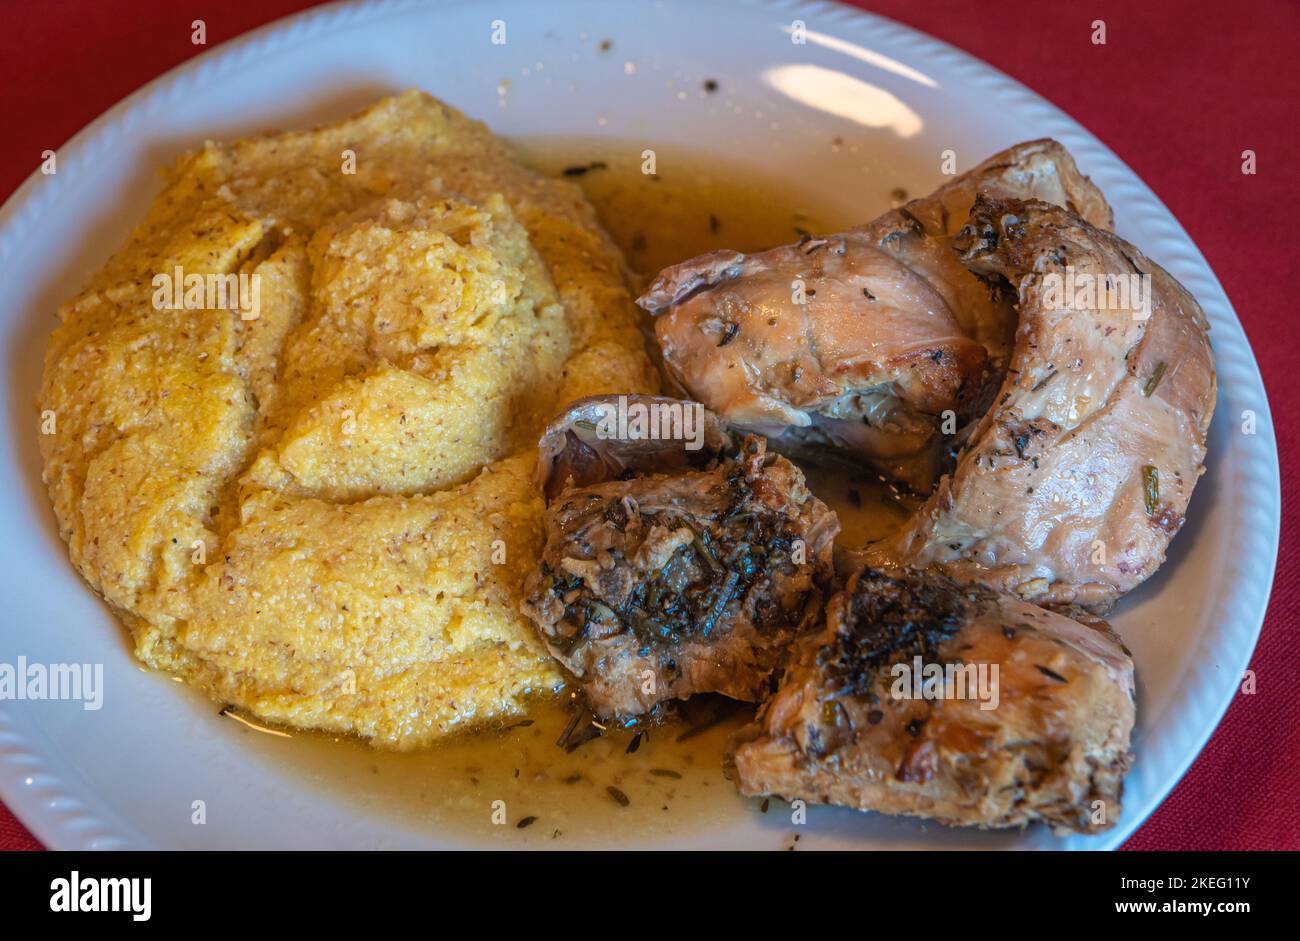 rabbit meat with polenta. local corn porridge with stew pieces of rabbit. Selective focus with shallow depth of field. Traditional italian cuisine. Stock Photo